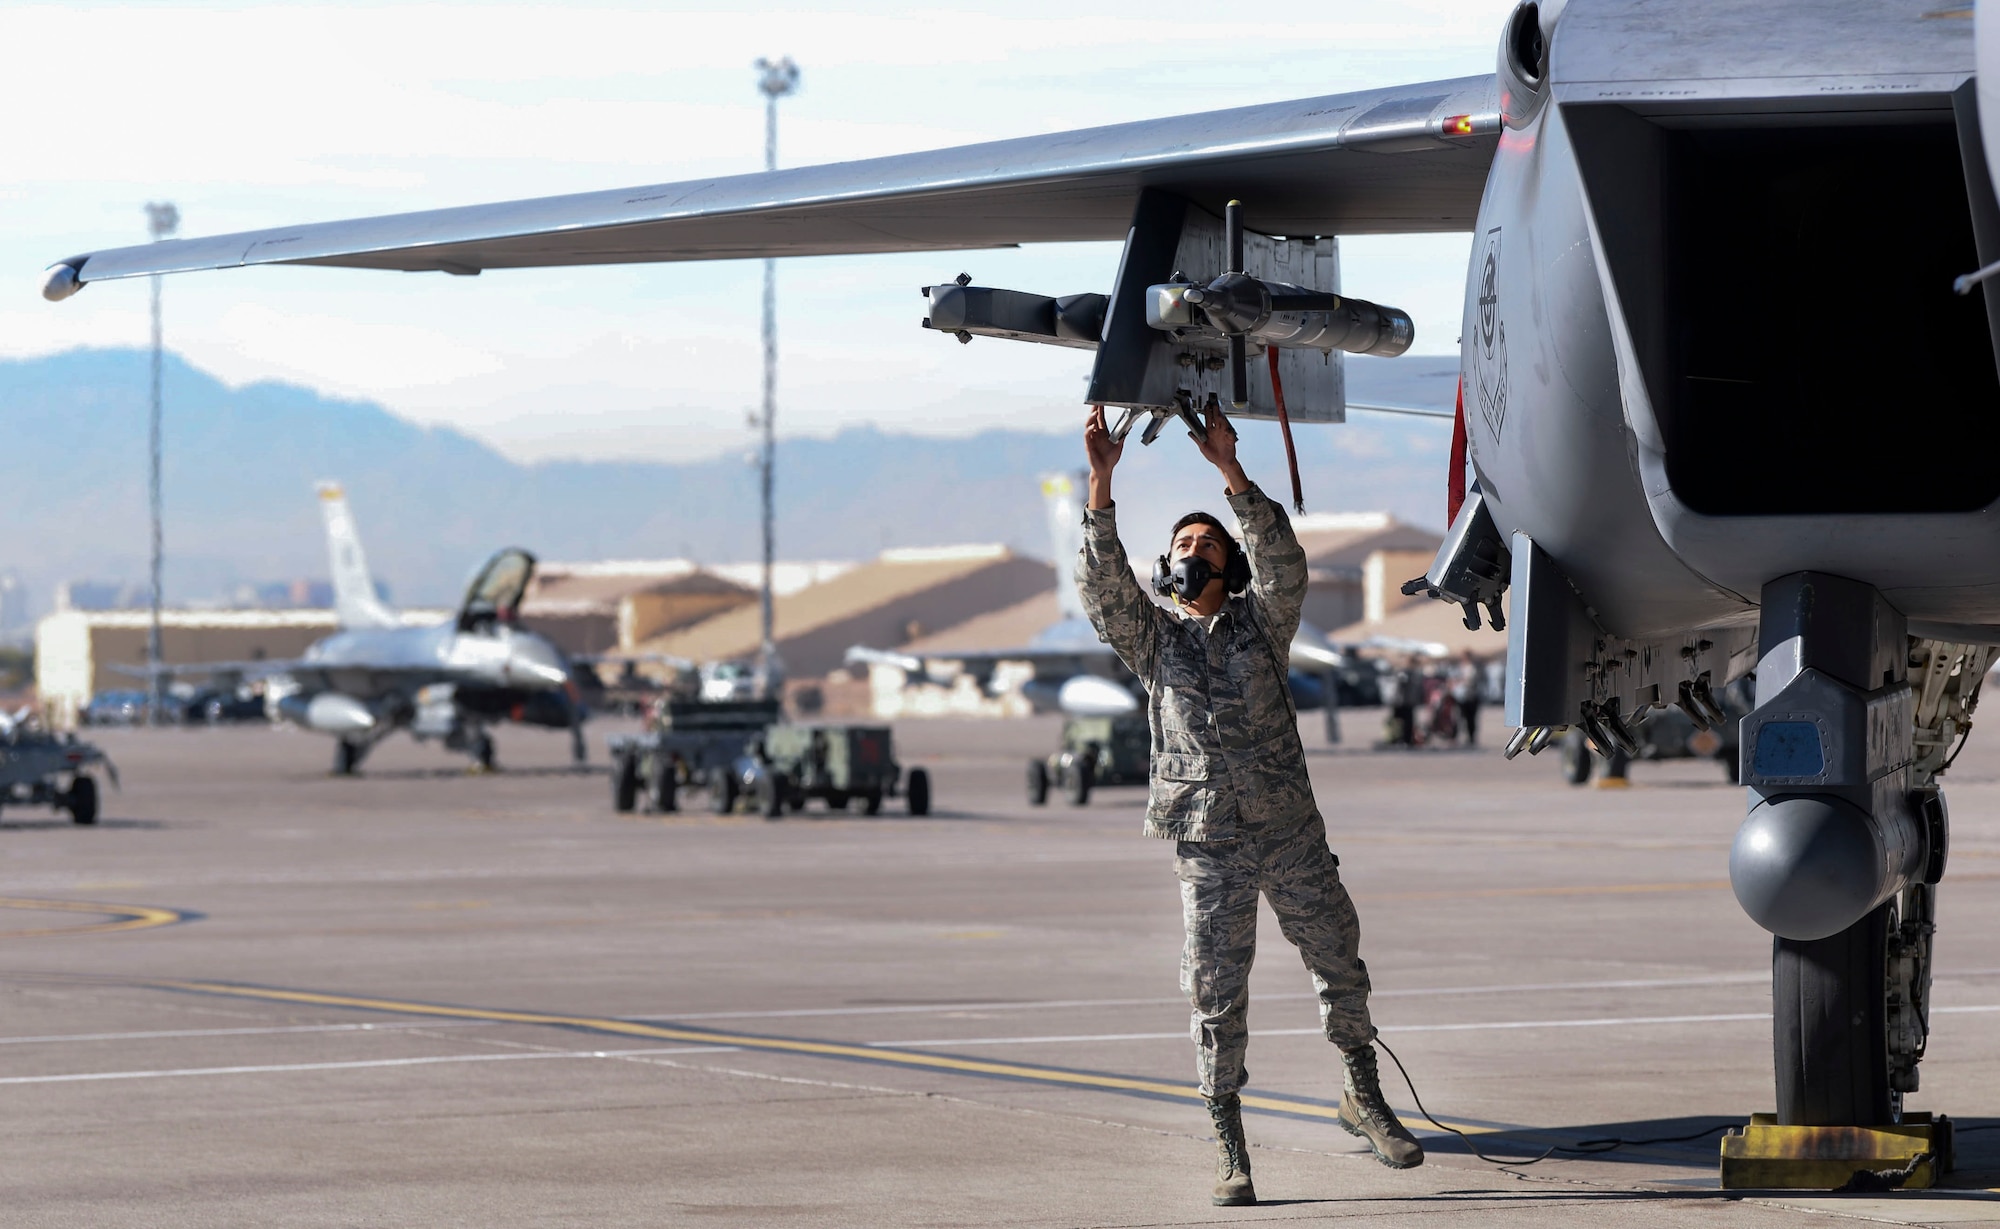 Airman 1st Class Bonifacio Garcia, 757th Aircraft Maintenance Squadron Strike Aircraft Maintenance Unit F-15E Strike Eagle fighter jet maintainer, inspects an F-15E before flight Nov. 15, 2018 at Nellis Air Force Base, Nevada. Crew chiefs are required to perform inspections prior to every launch. (U.S. Air Force photo by Airman Bailee A. Darbasie)